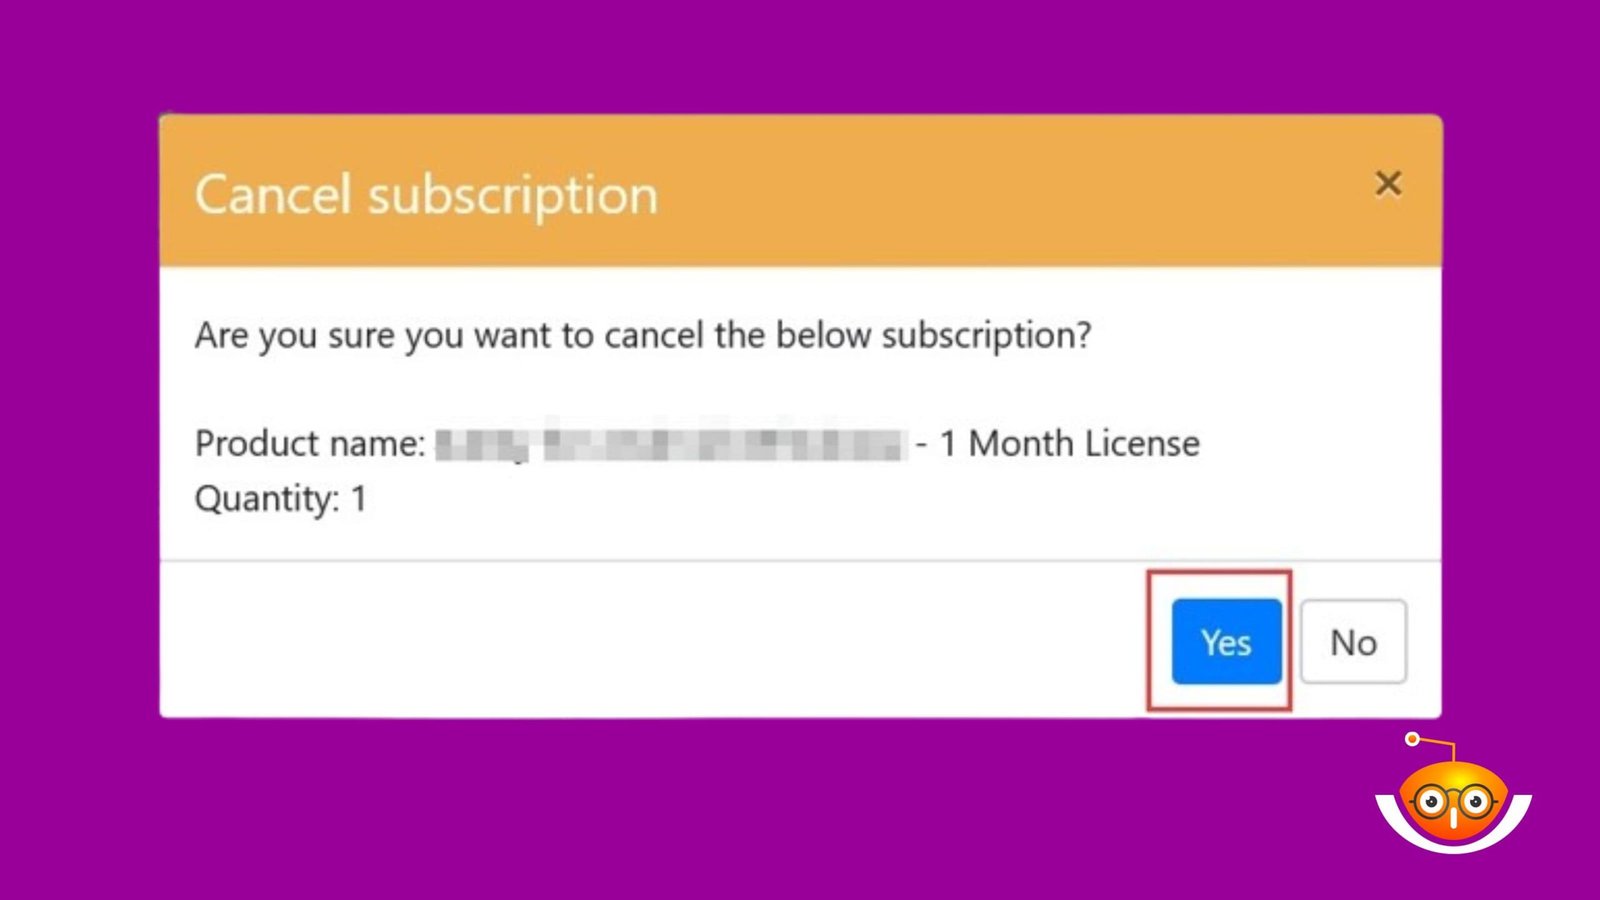 How to Cancel All Subscriptions on Your Debit Card Easily-technious.com